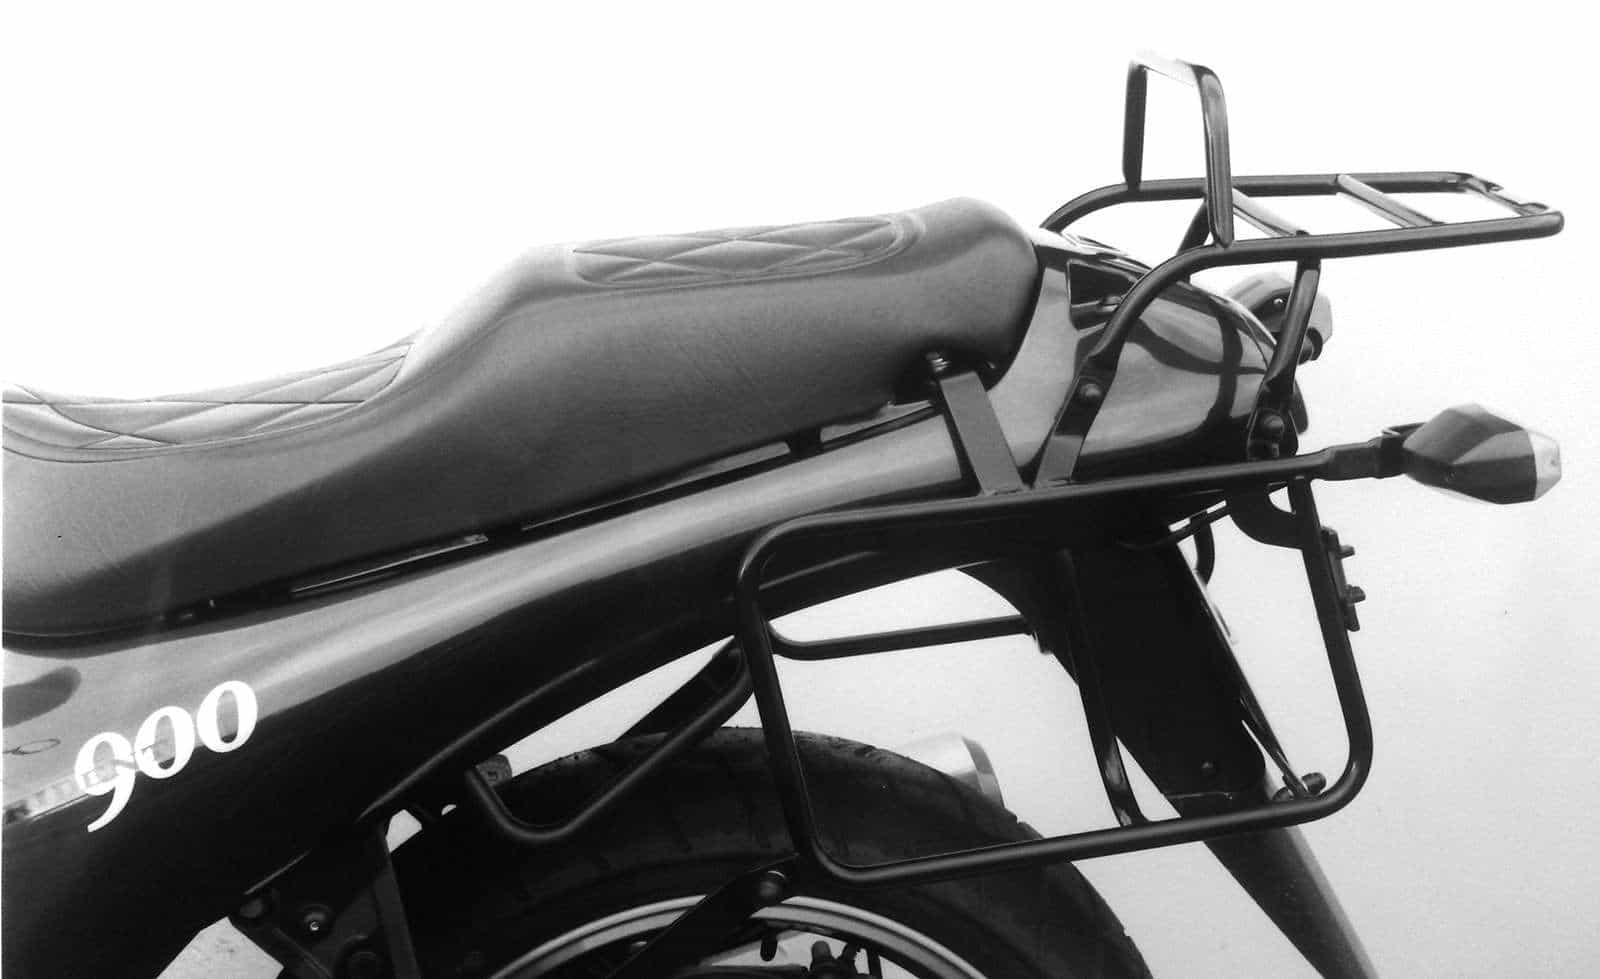 Complete carrier set (side- and topcase carrier) black for Triumph Trident 750/900/Sprint (1992-1998)